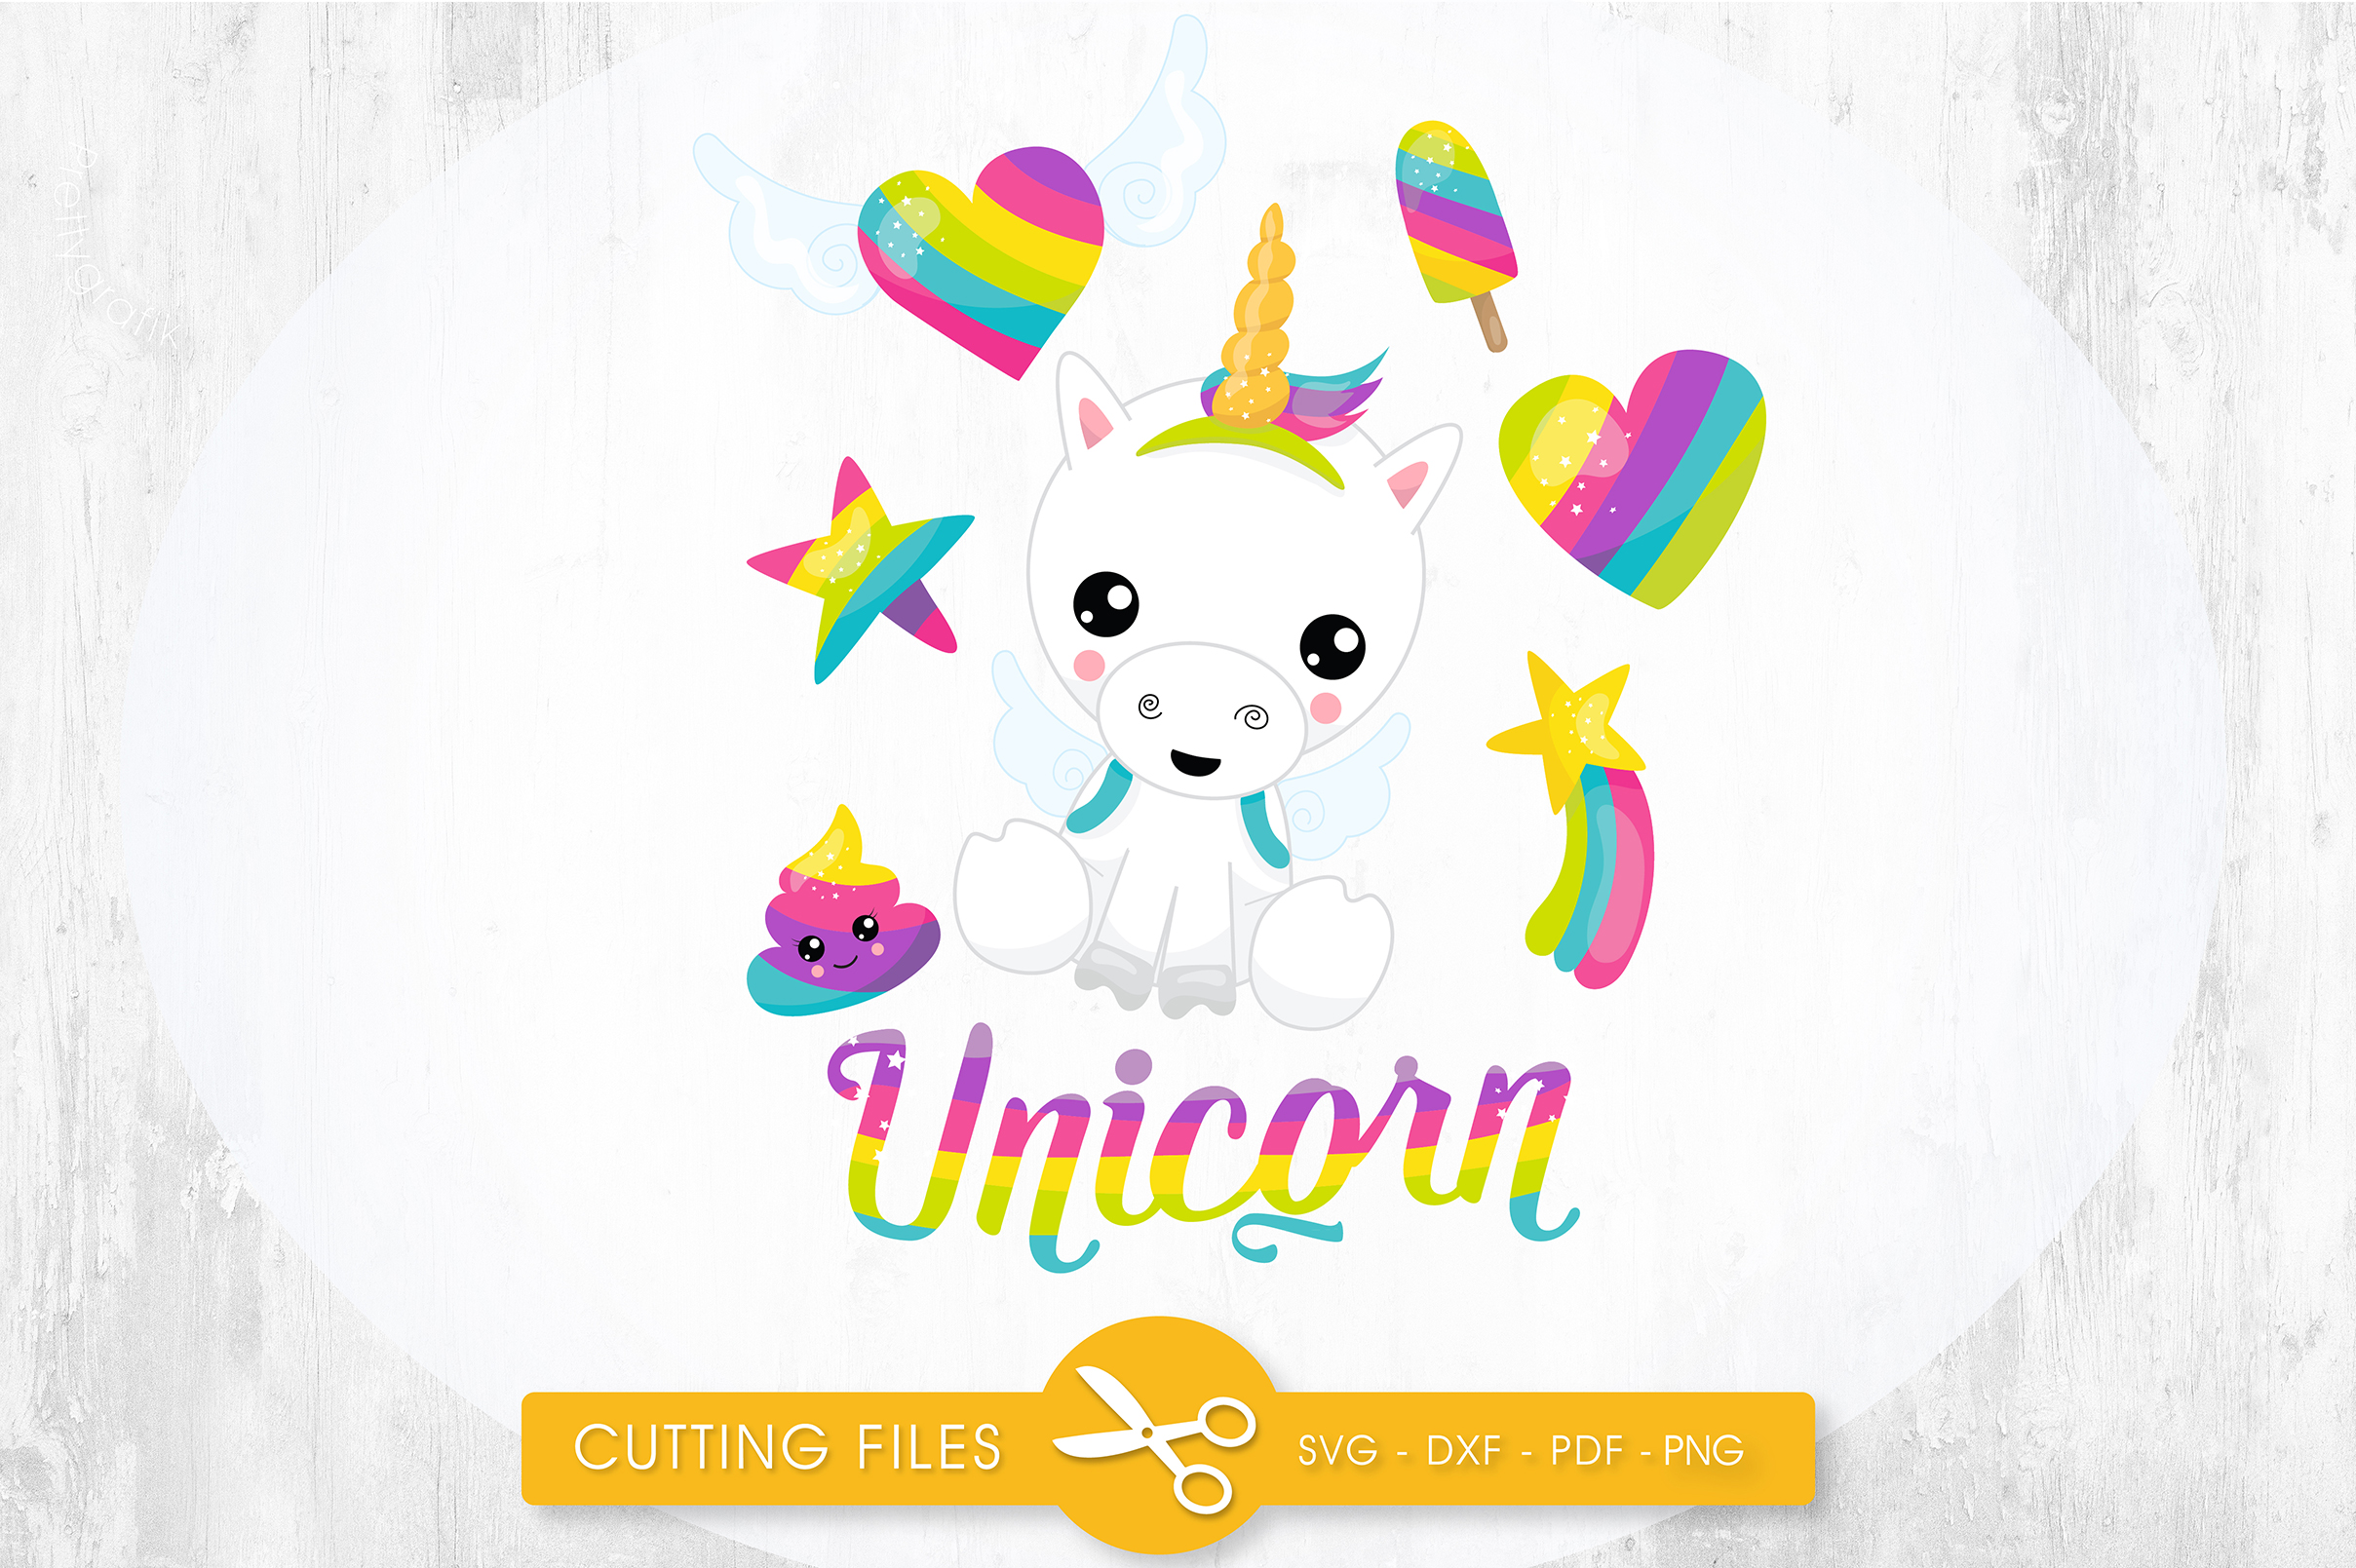 Magical Unicorn cutting files svg, dxf, pdf, eps included - cut files